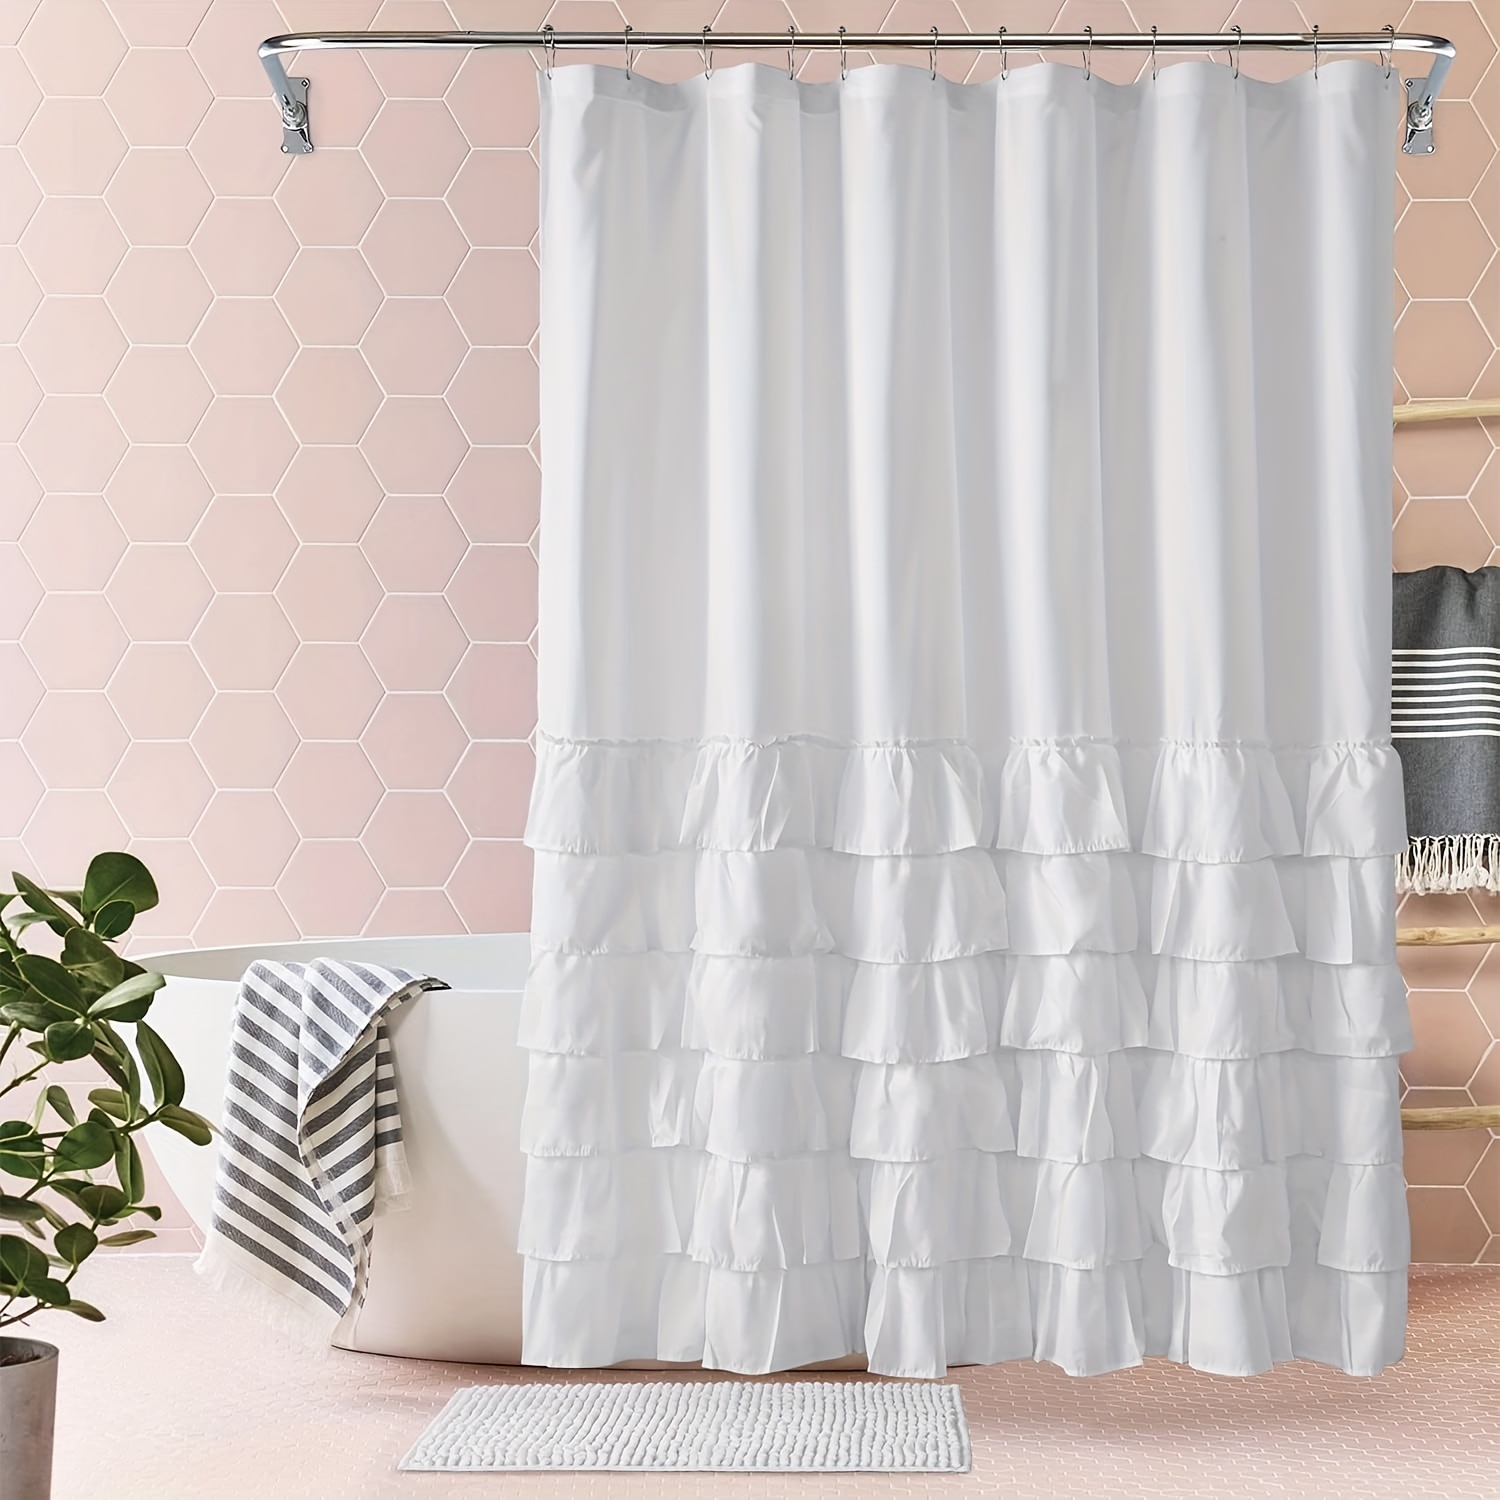 

1pc Layered Ruffle Trim Shower Curtain, Water-resistant Bathroom Decorative Curtain, Solid Color Bathroom Partition, Bathroom Accessories, Home Decor, 72*72inch/182cm*182cm